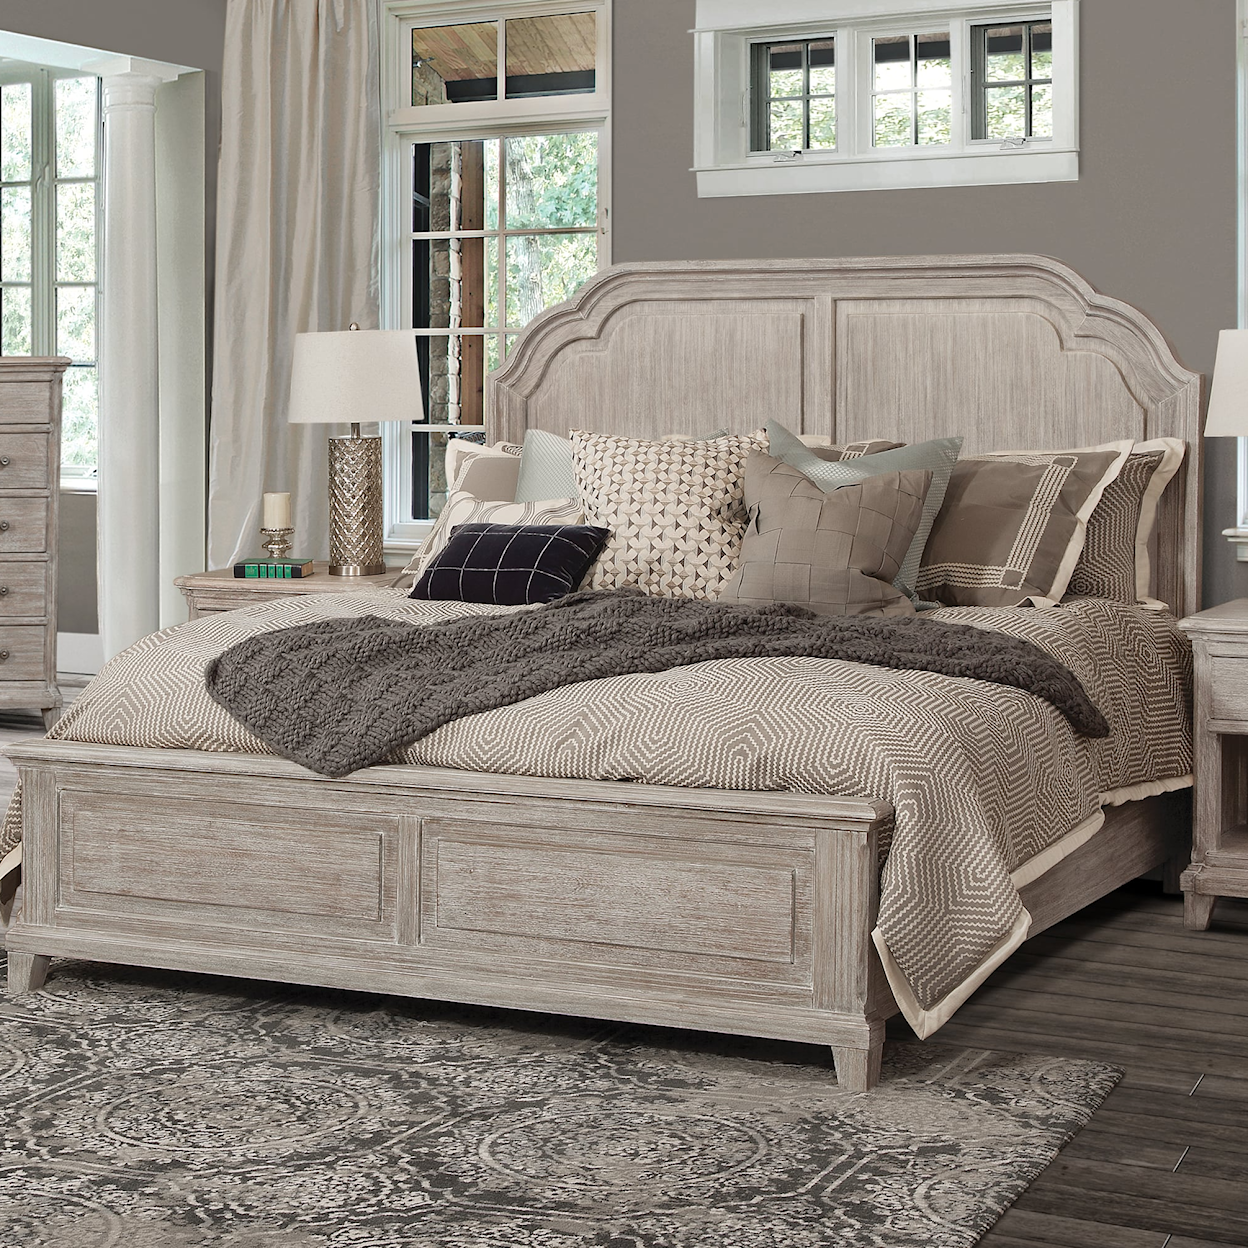 American Woodcrafters Painters Creek King Panel Bed